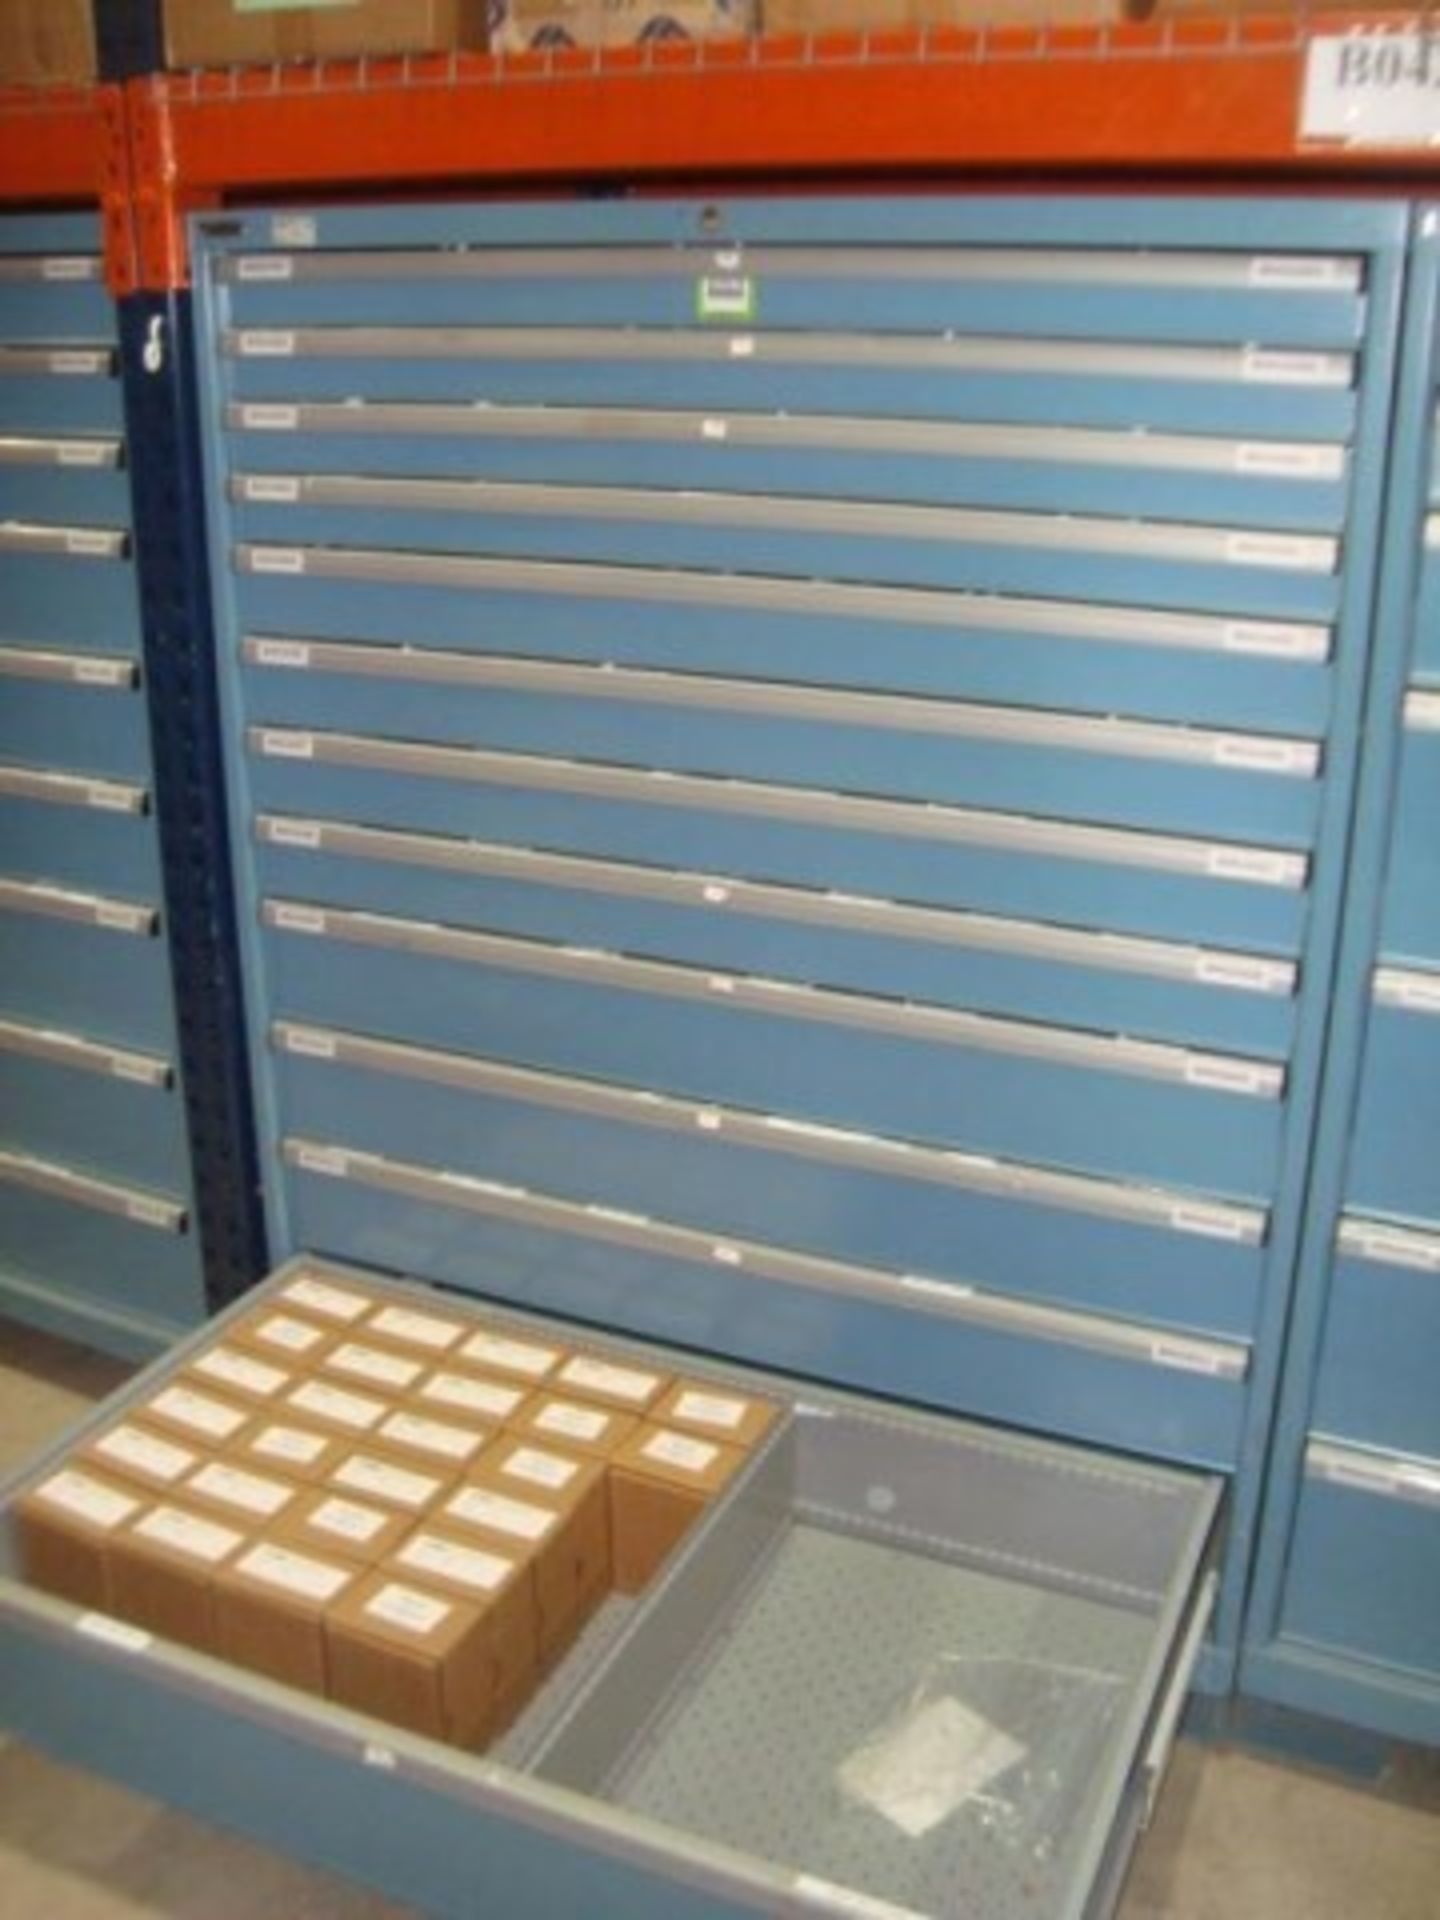 12-Drawer Parts Supply Cabinet - Image 7 of 7